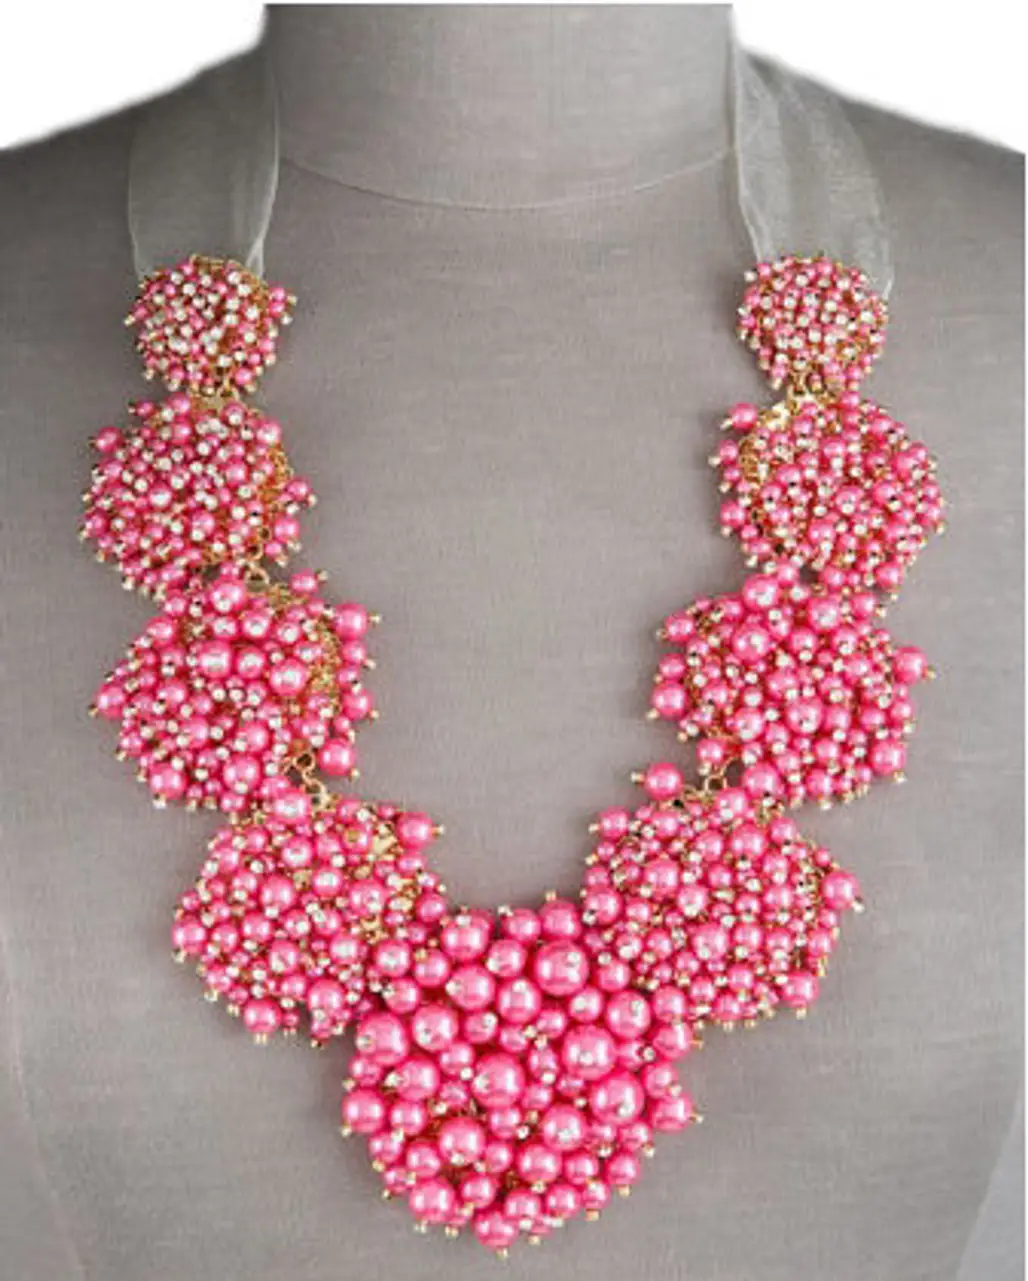 Kate Spade Bauble Bow Necklace